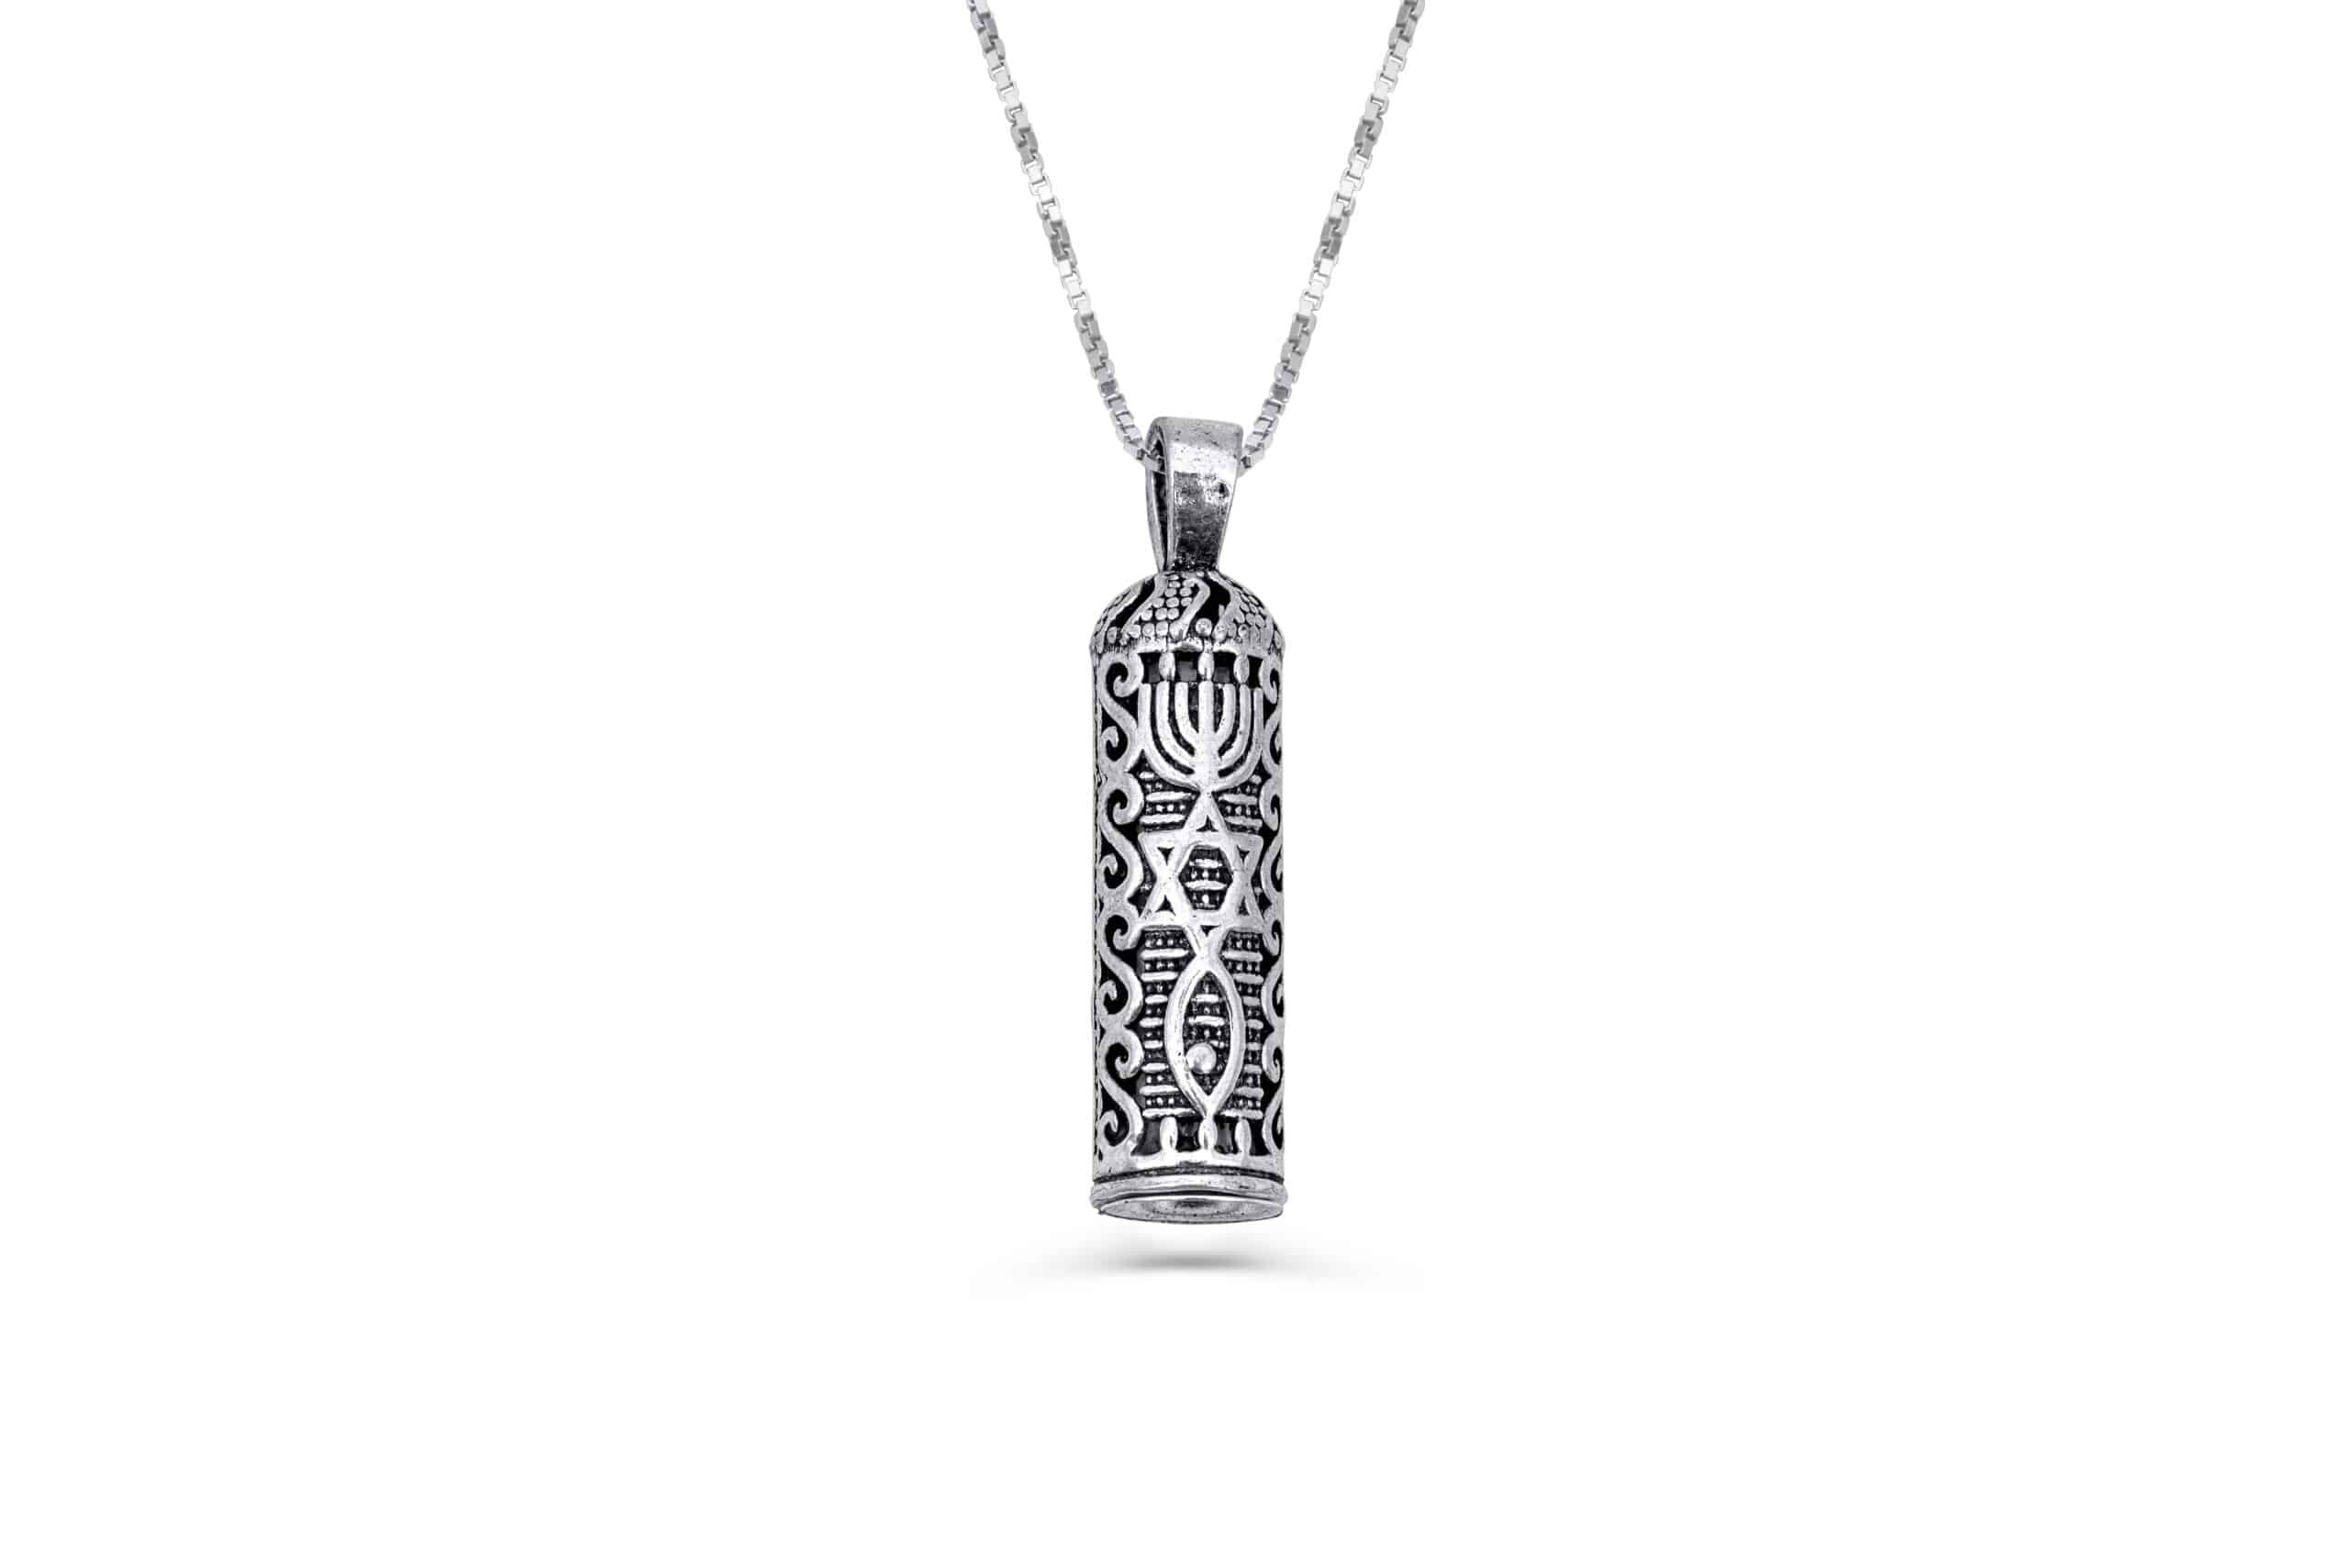 Mezuzah Silver Pendant with Symbols from Judaism